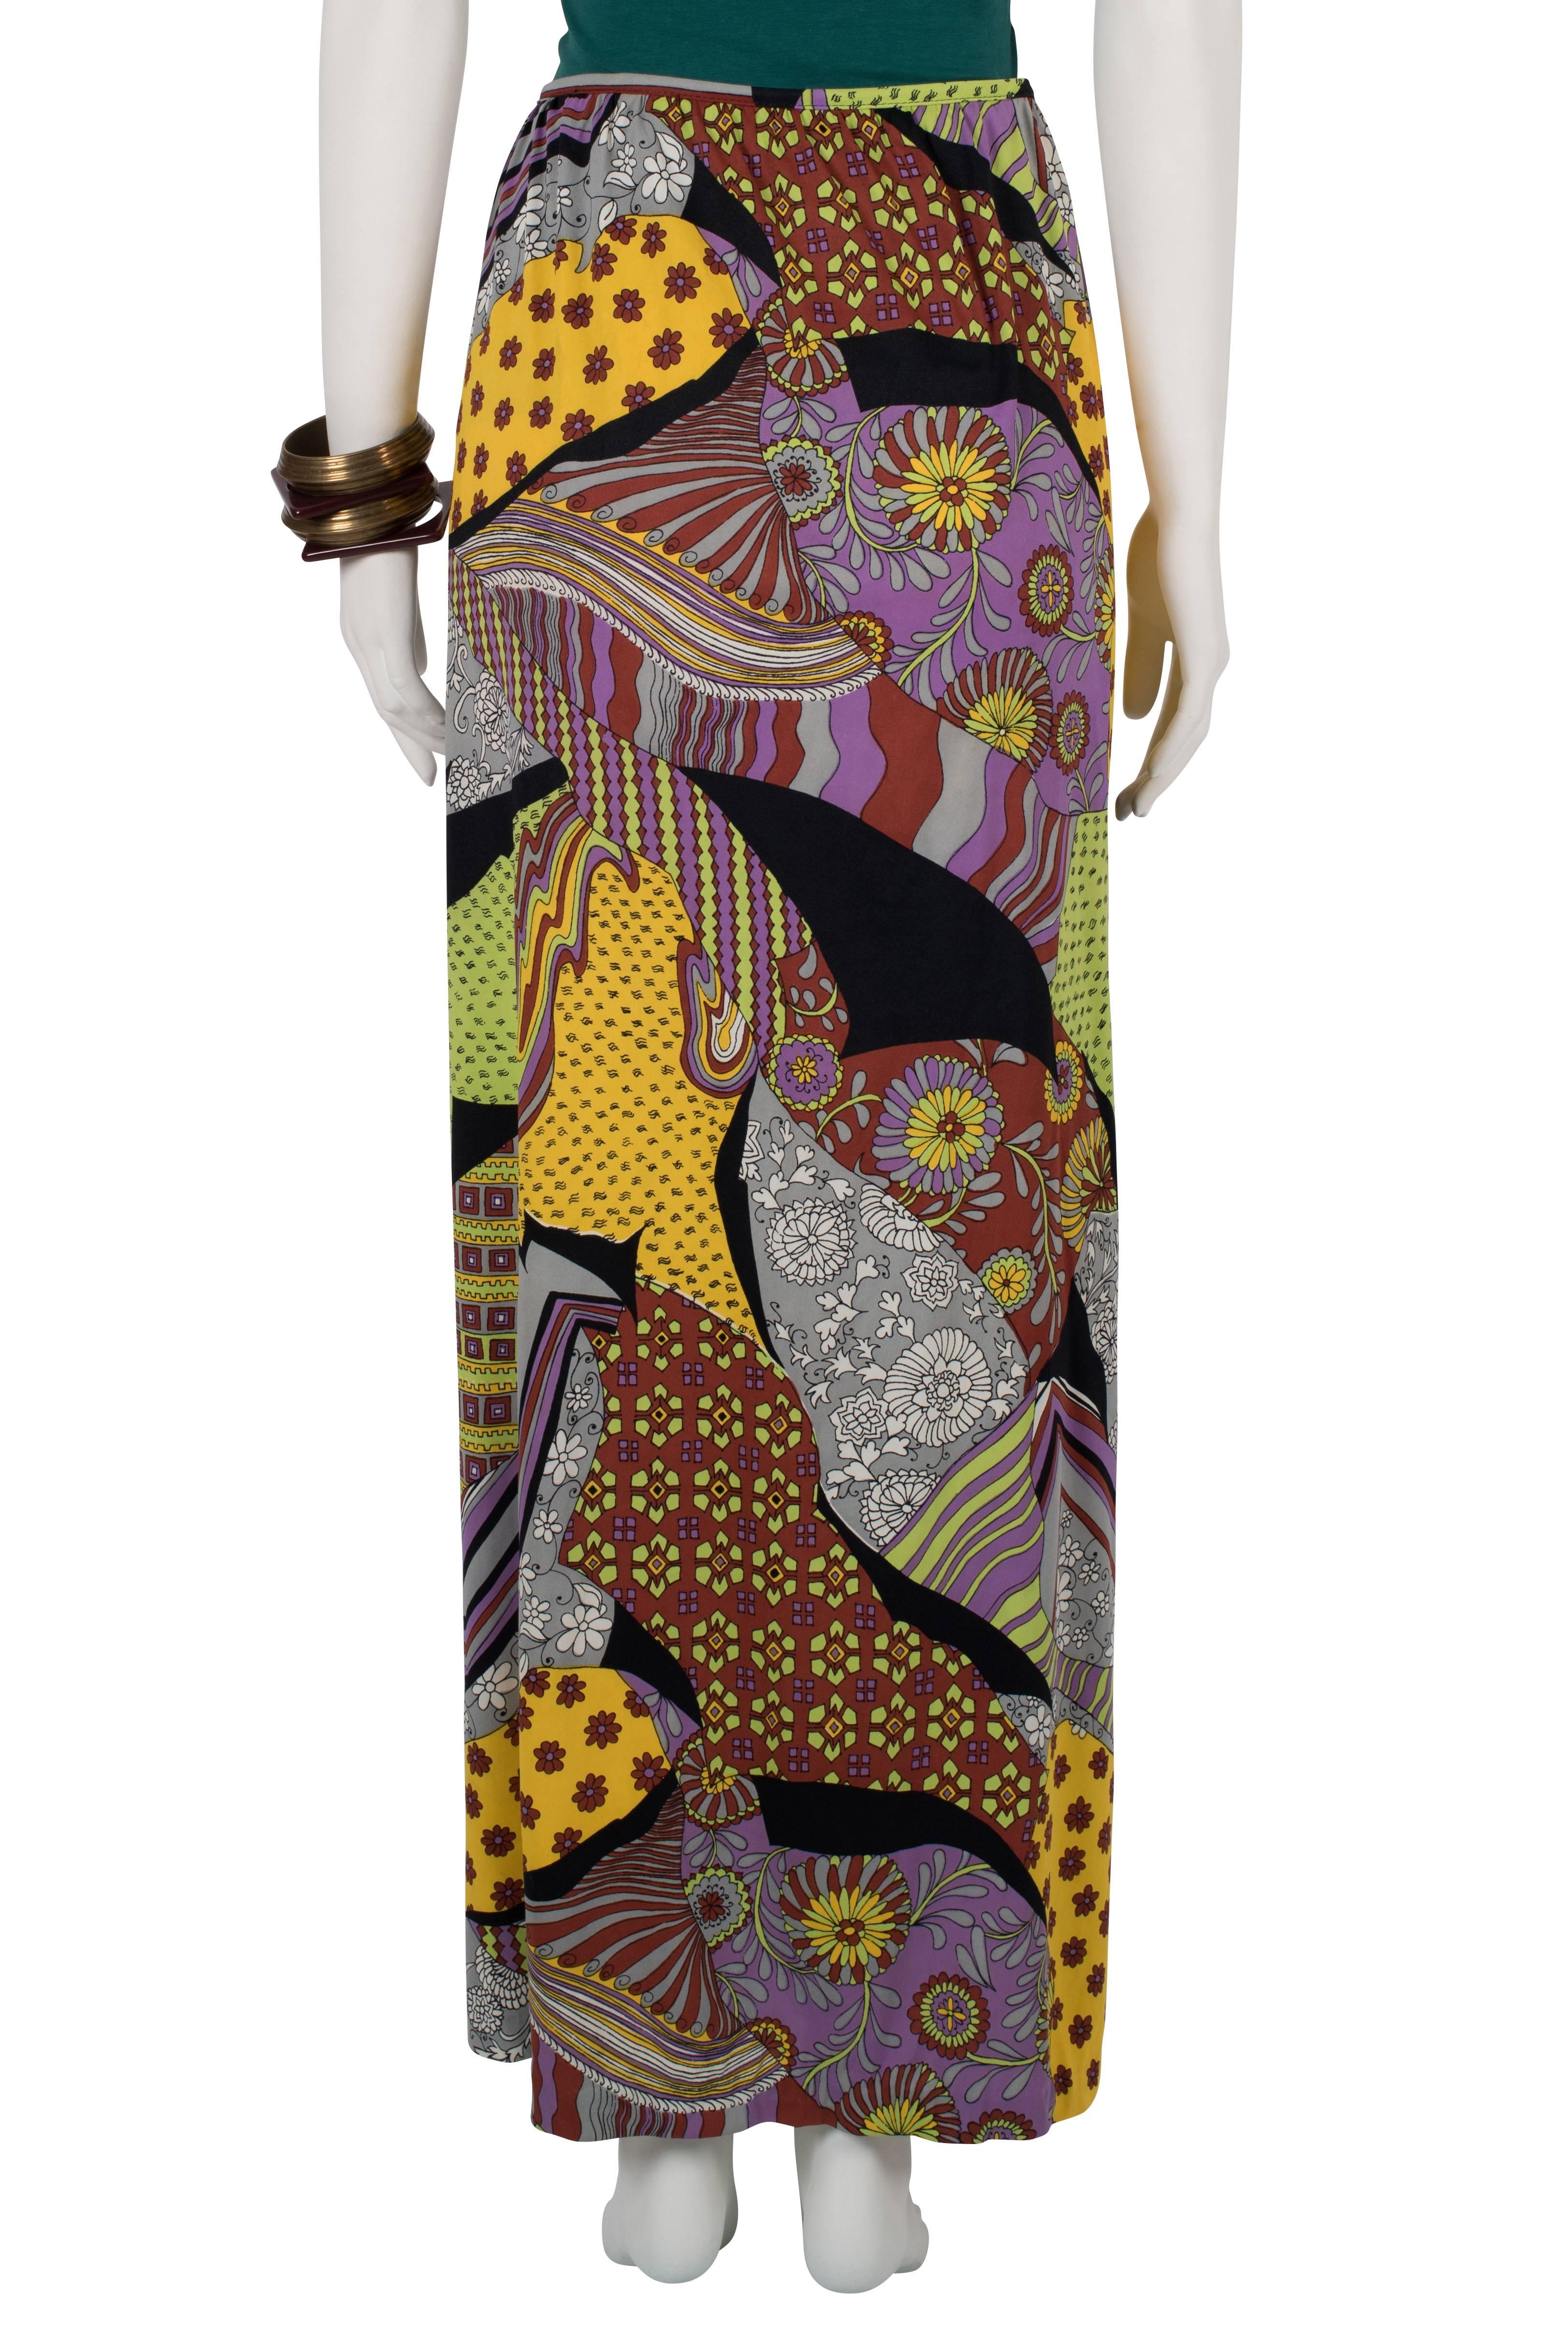 1970's Donald Brooks Psychedelic Wrap Skirt 1